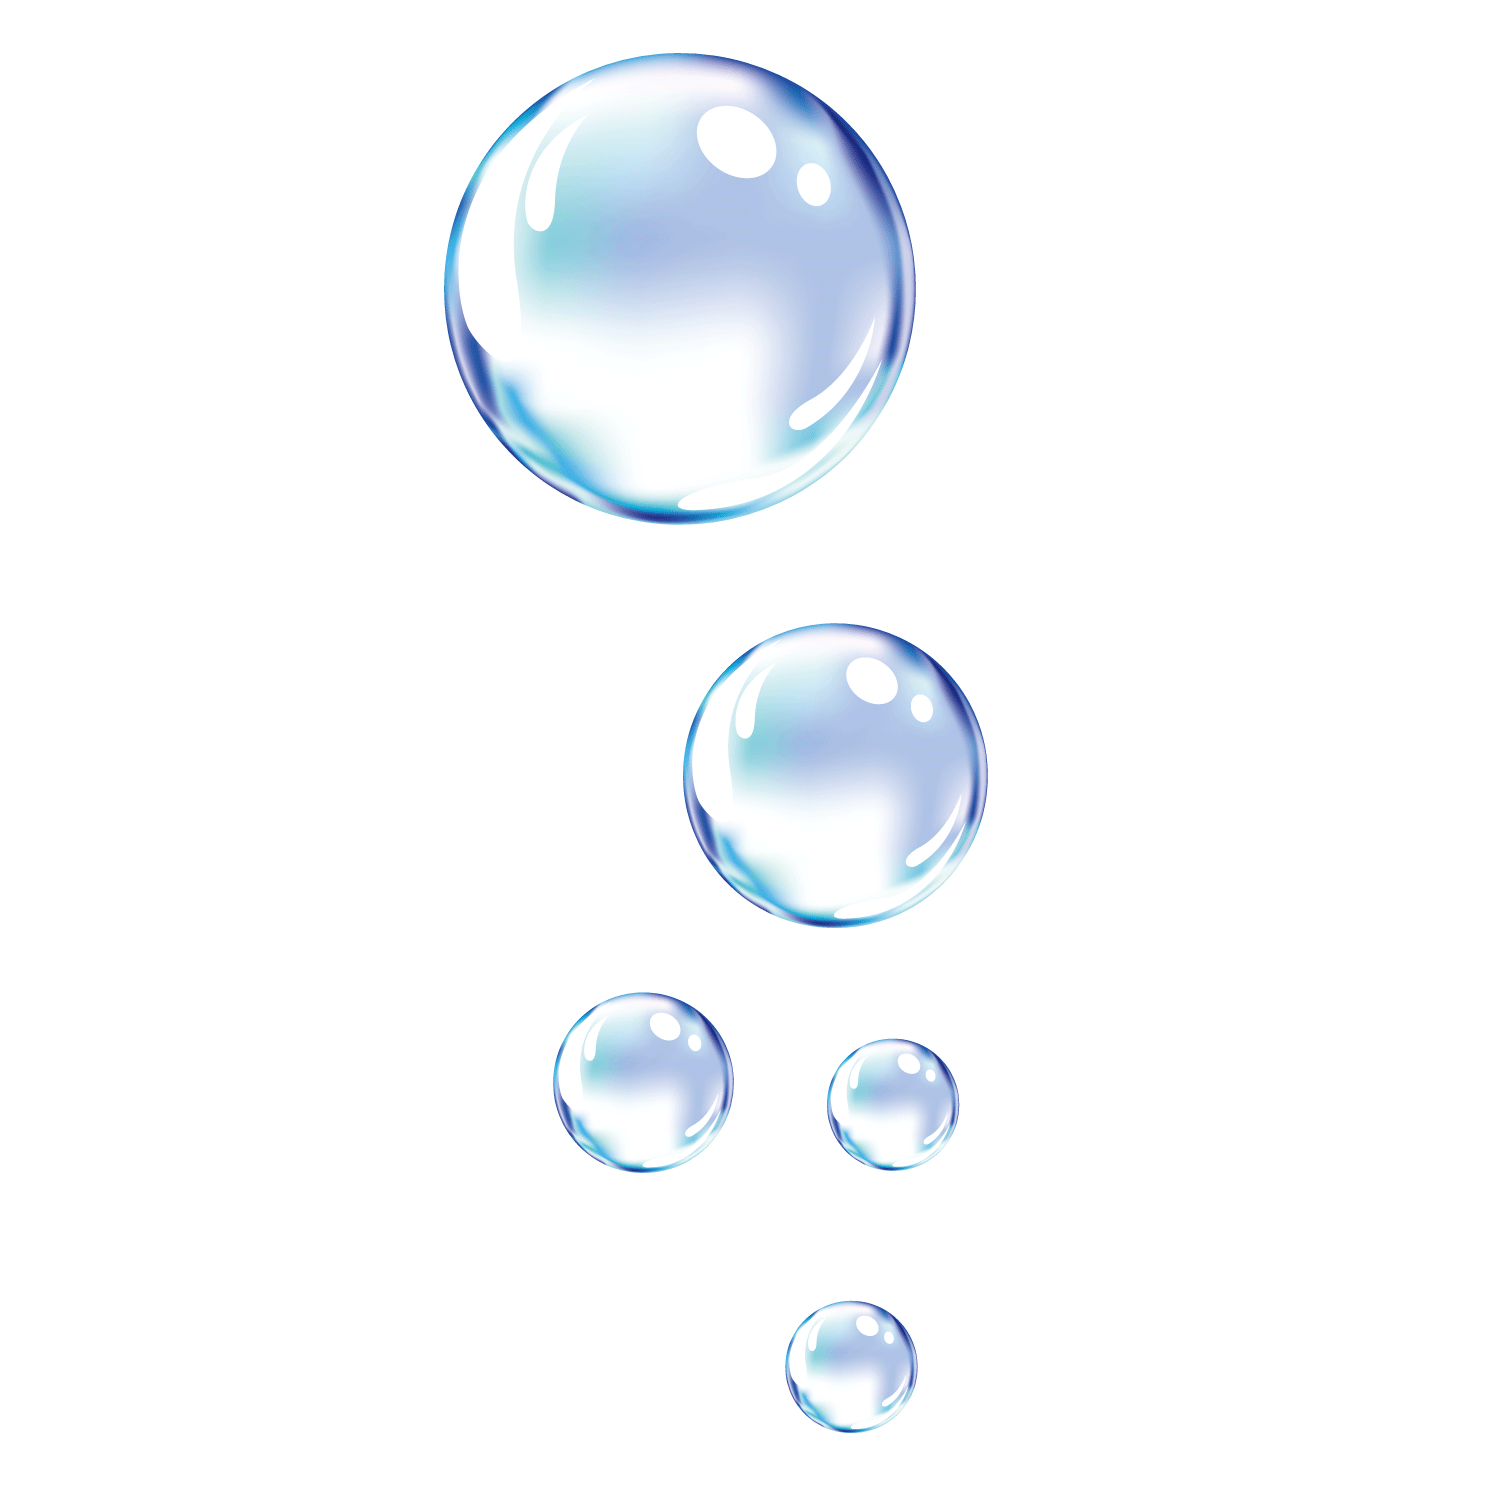 bubbles in photoshop download